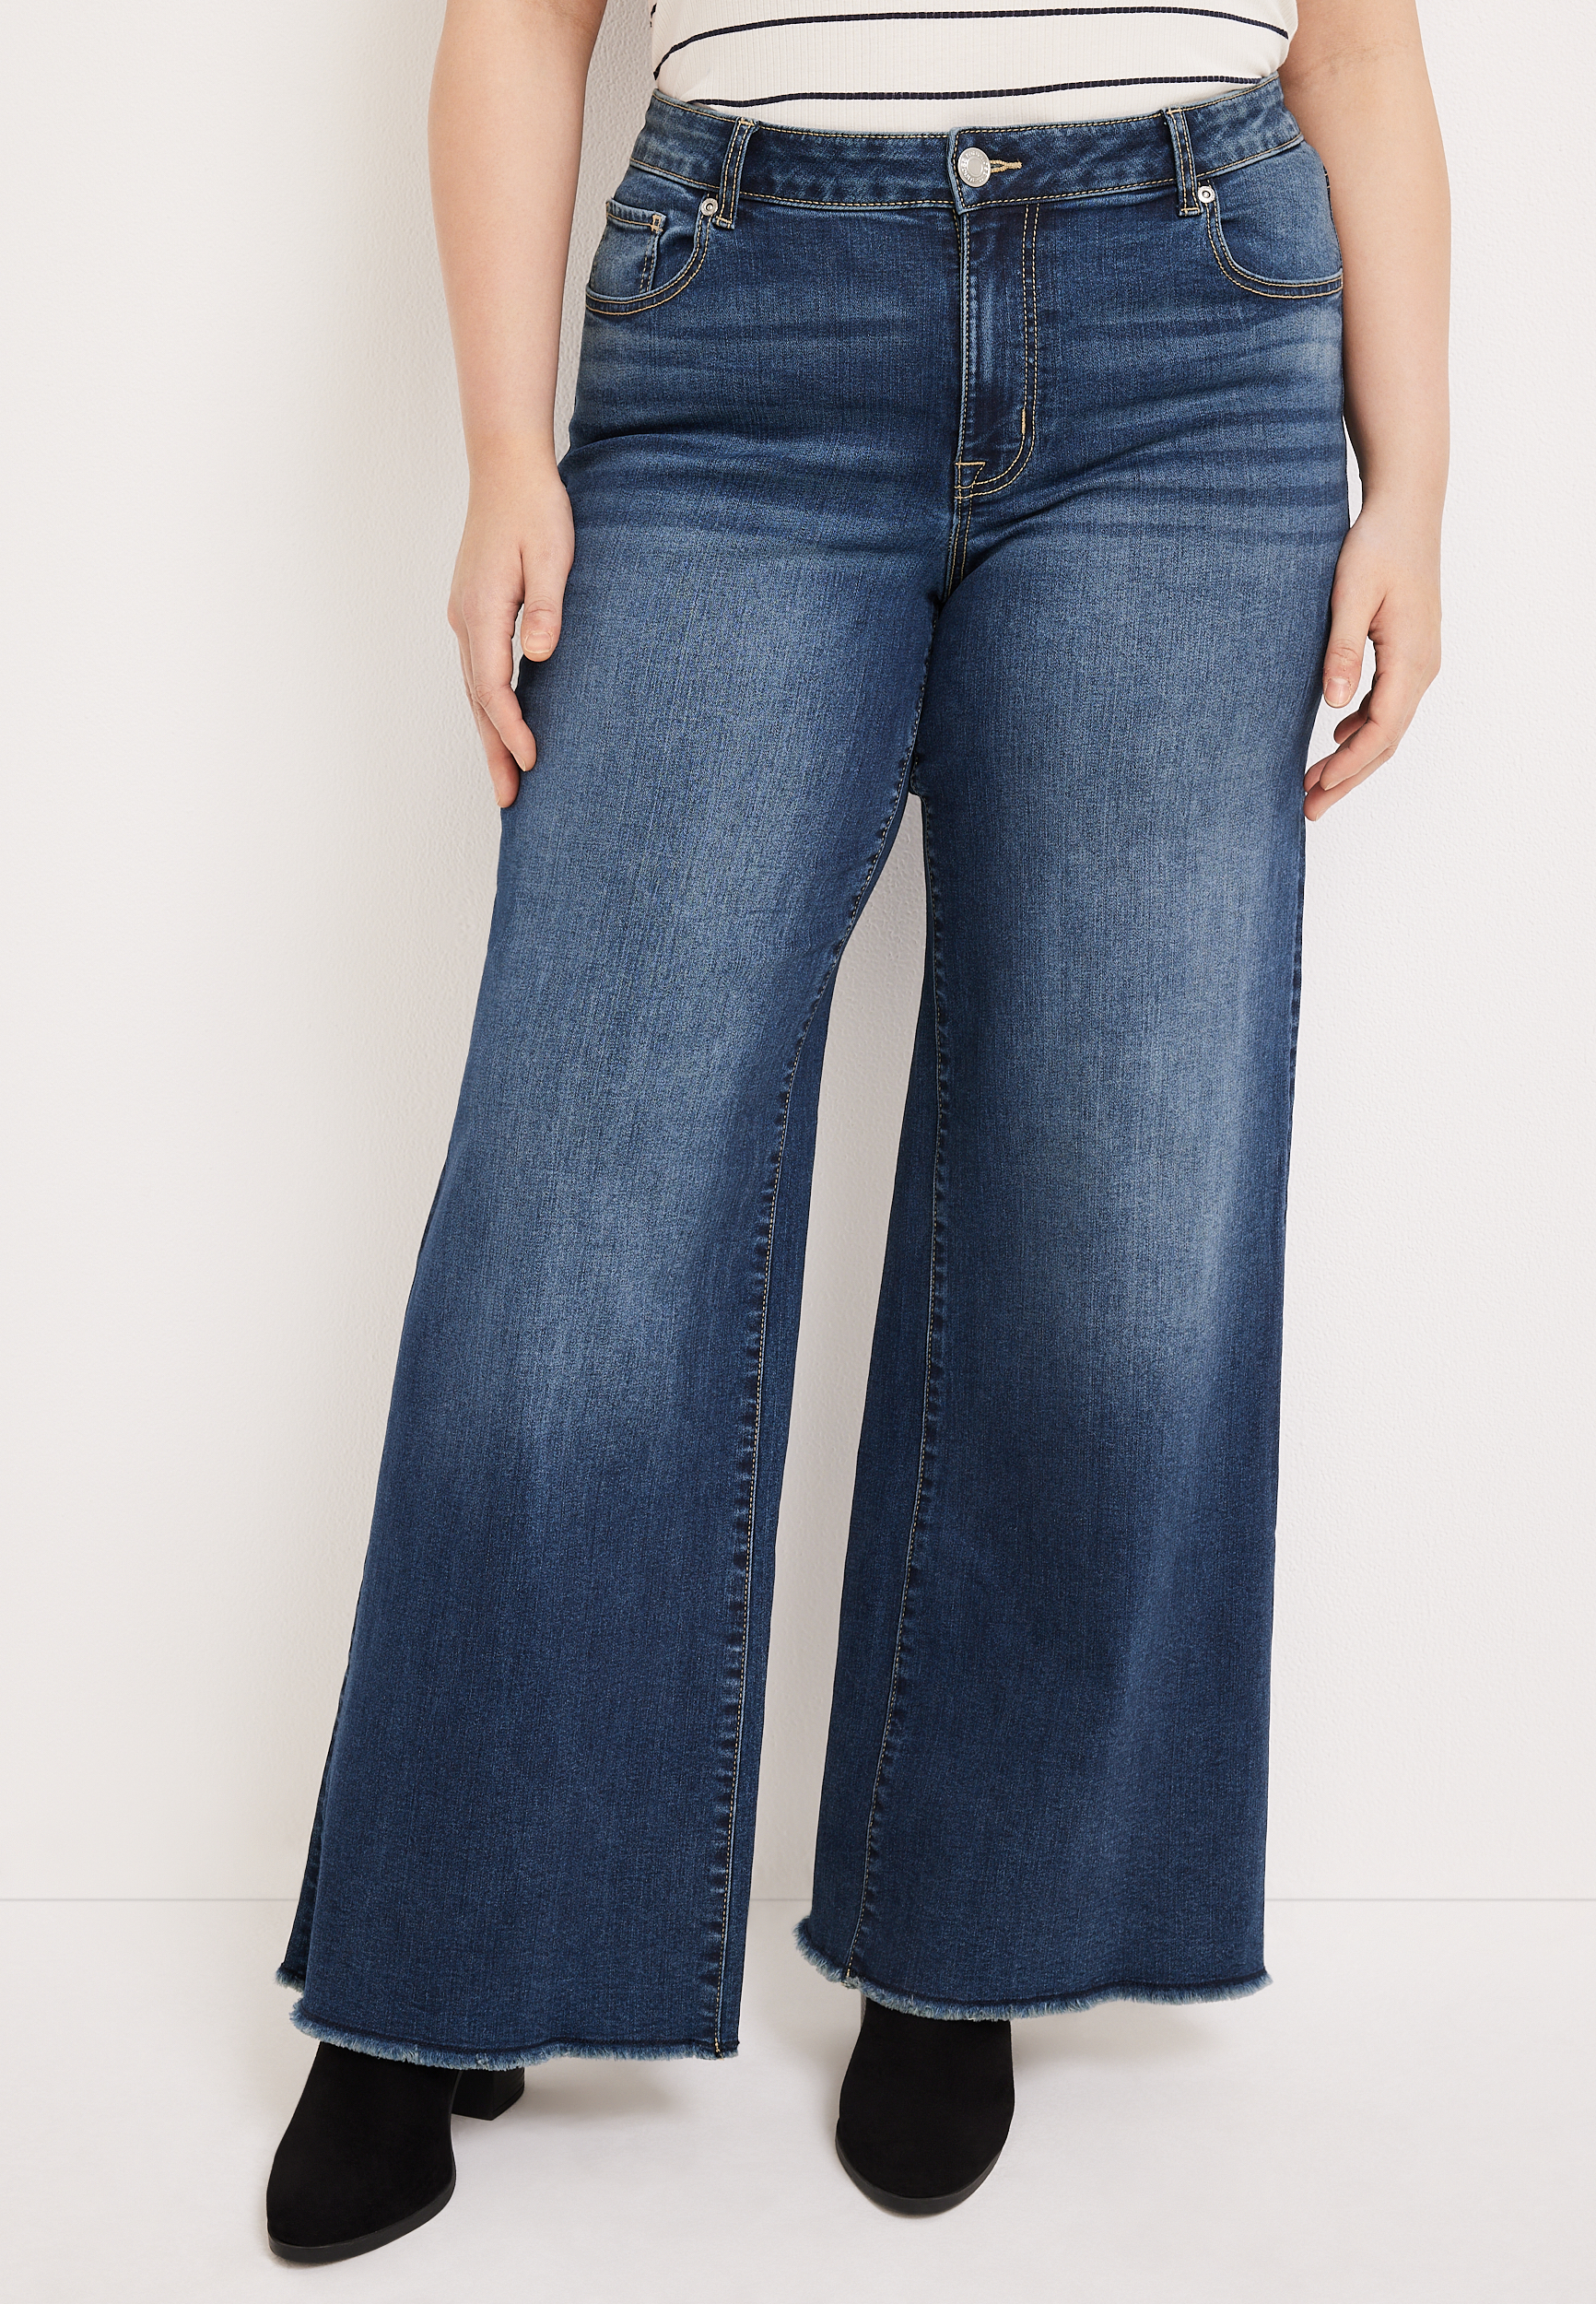 charter orientering forsvar Plus Size m jeans by maurices™ Wide Leg High Rise Frayed Hem Jean | maurices